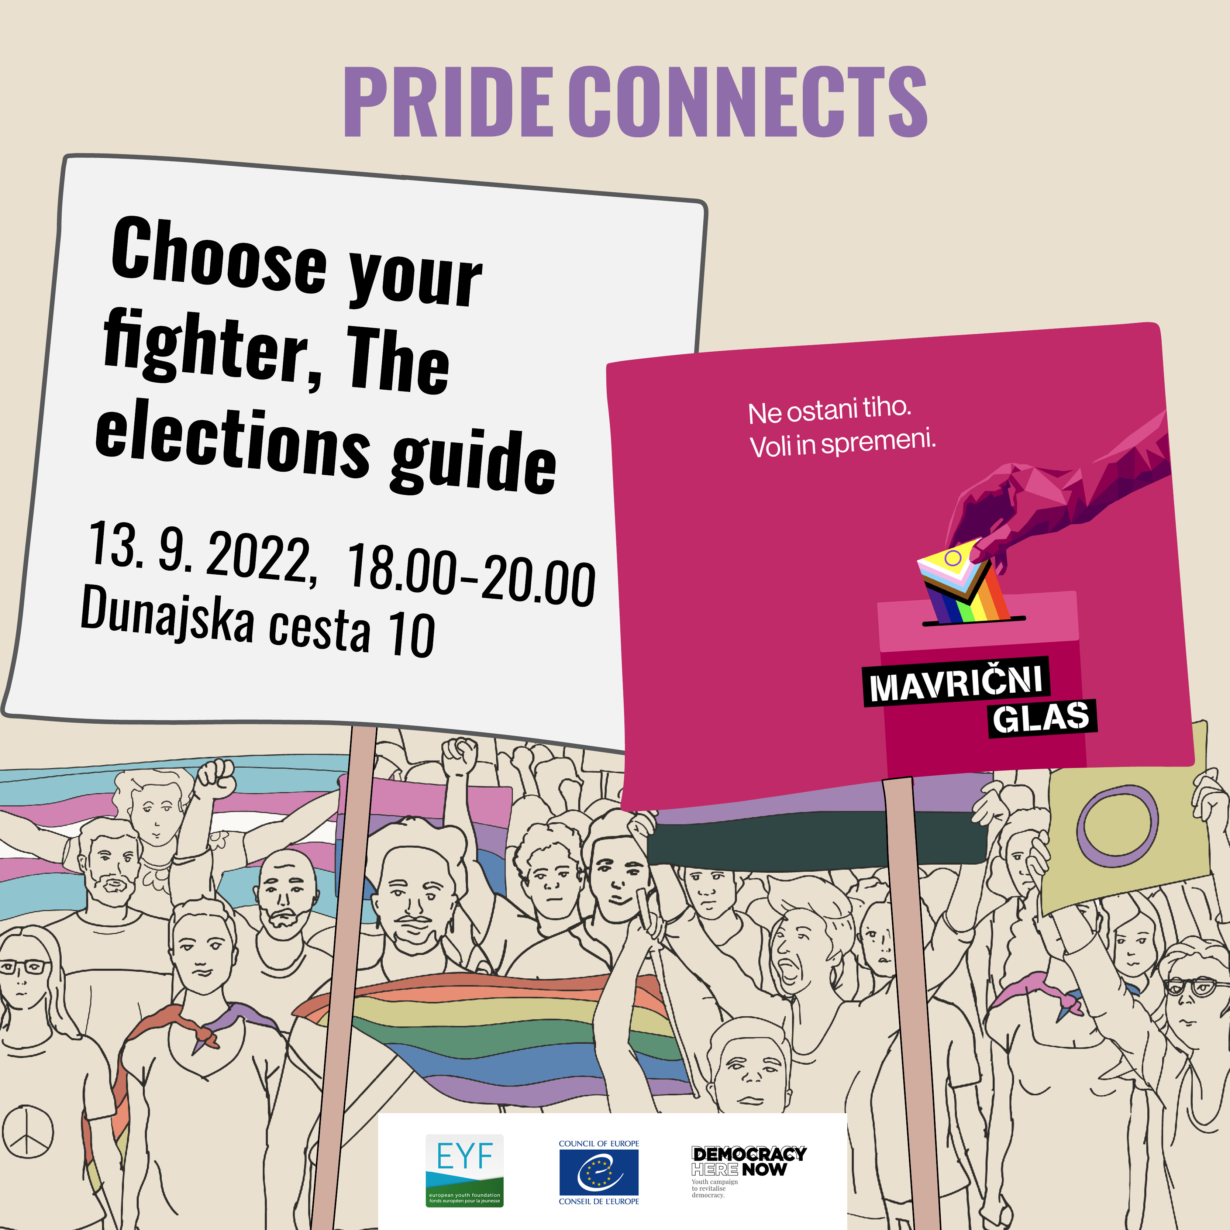 Parada povezuje: “Choose your fighter, The elections guide”